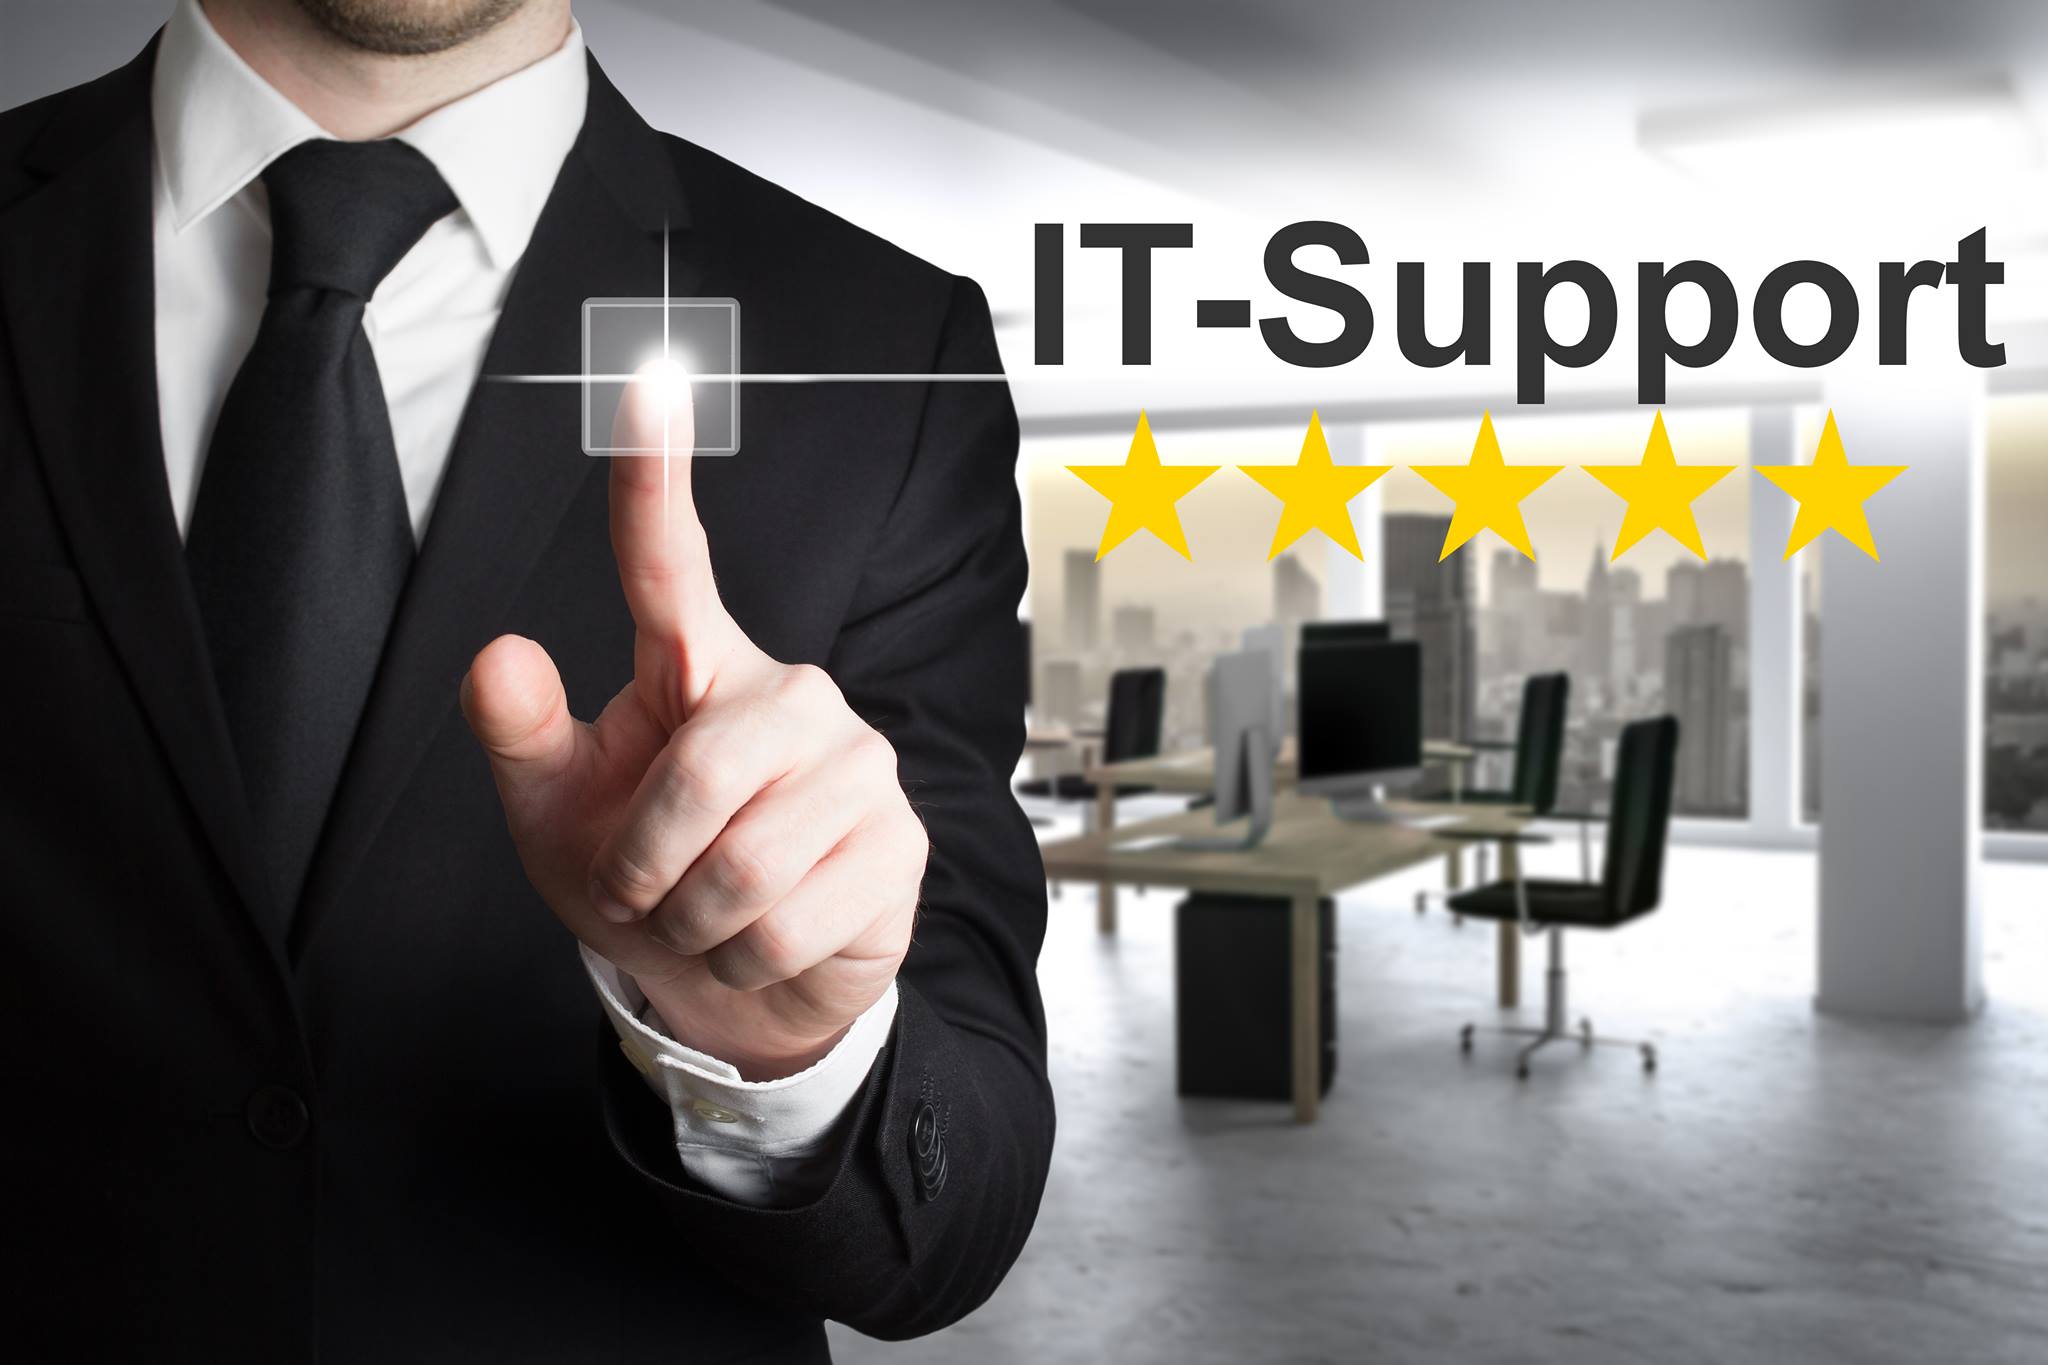 IT Technical Support